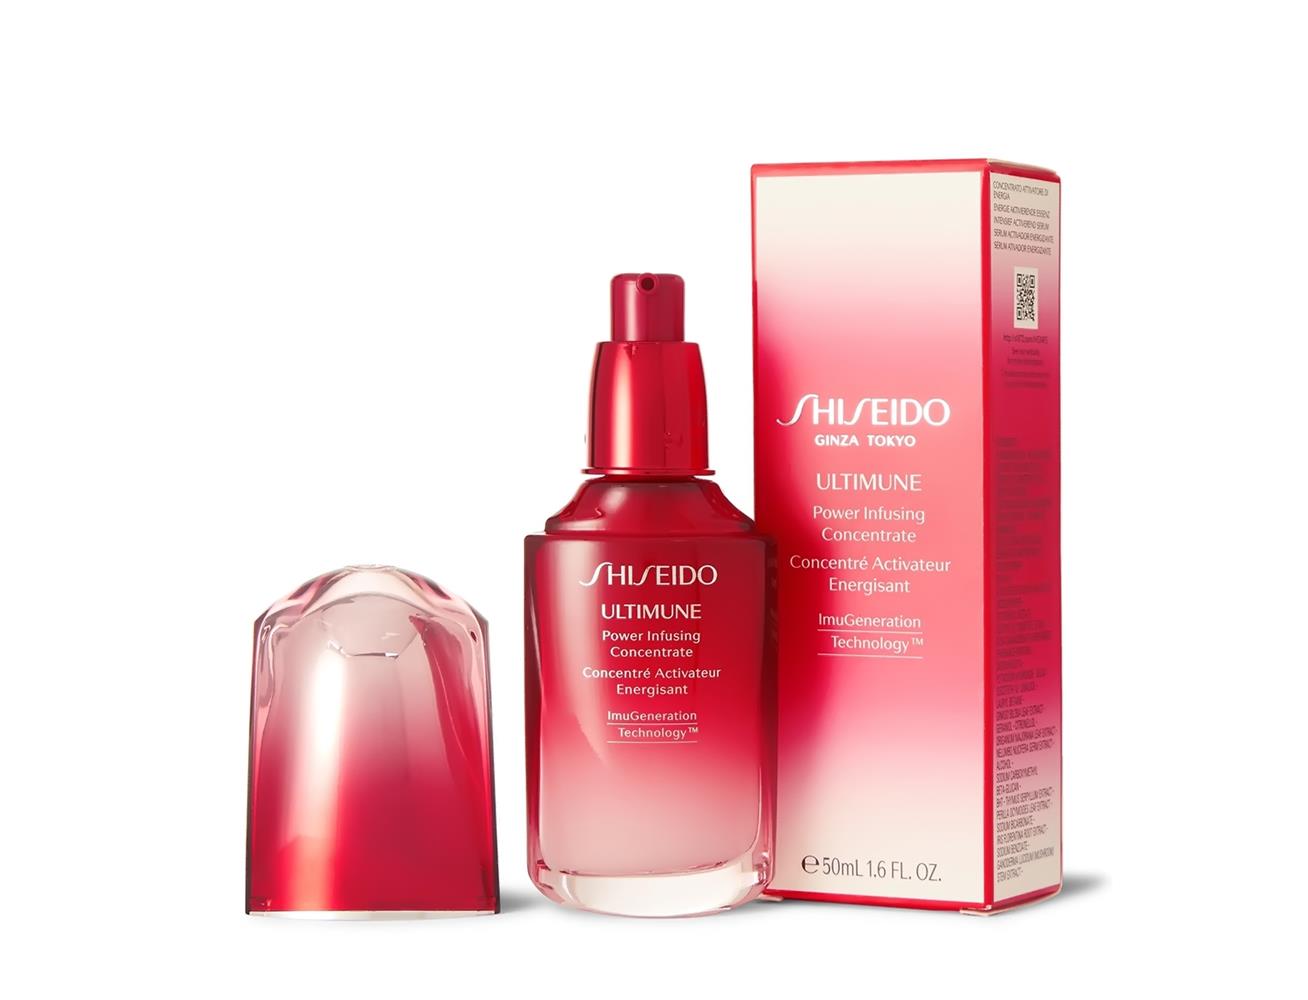 Ultimune концентрат шисейдо Power infusing. Концентрат Shiseido Ultimune Power infusing Concentrate. Сыворотка шисейдо. Шисейдо для волос.